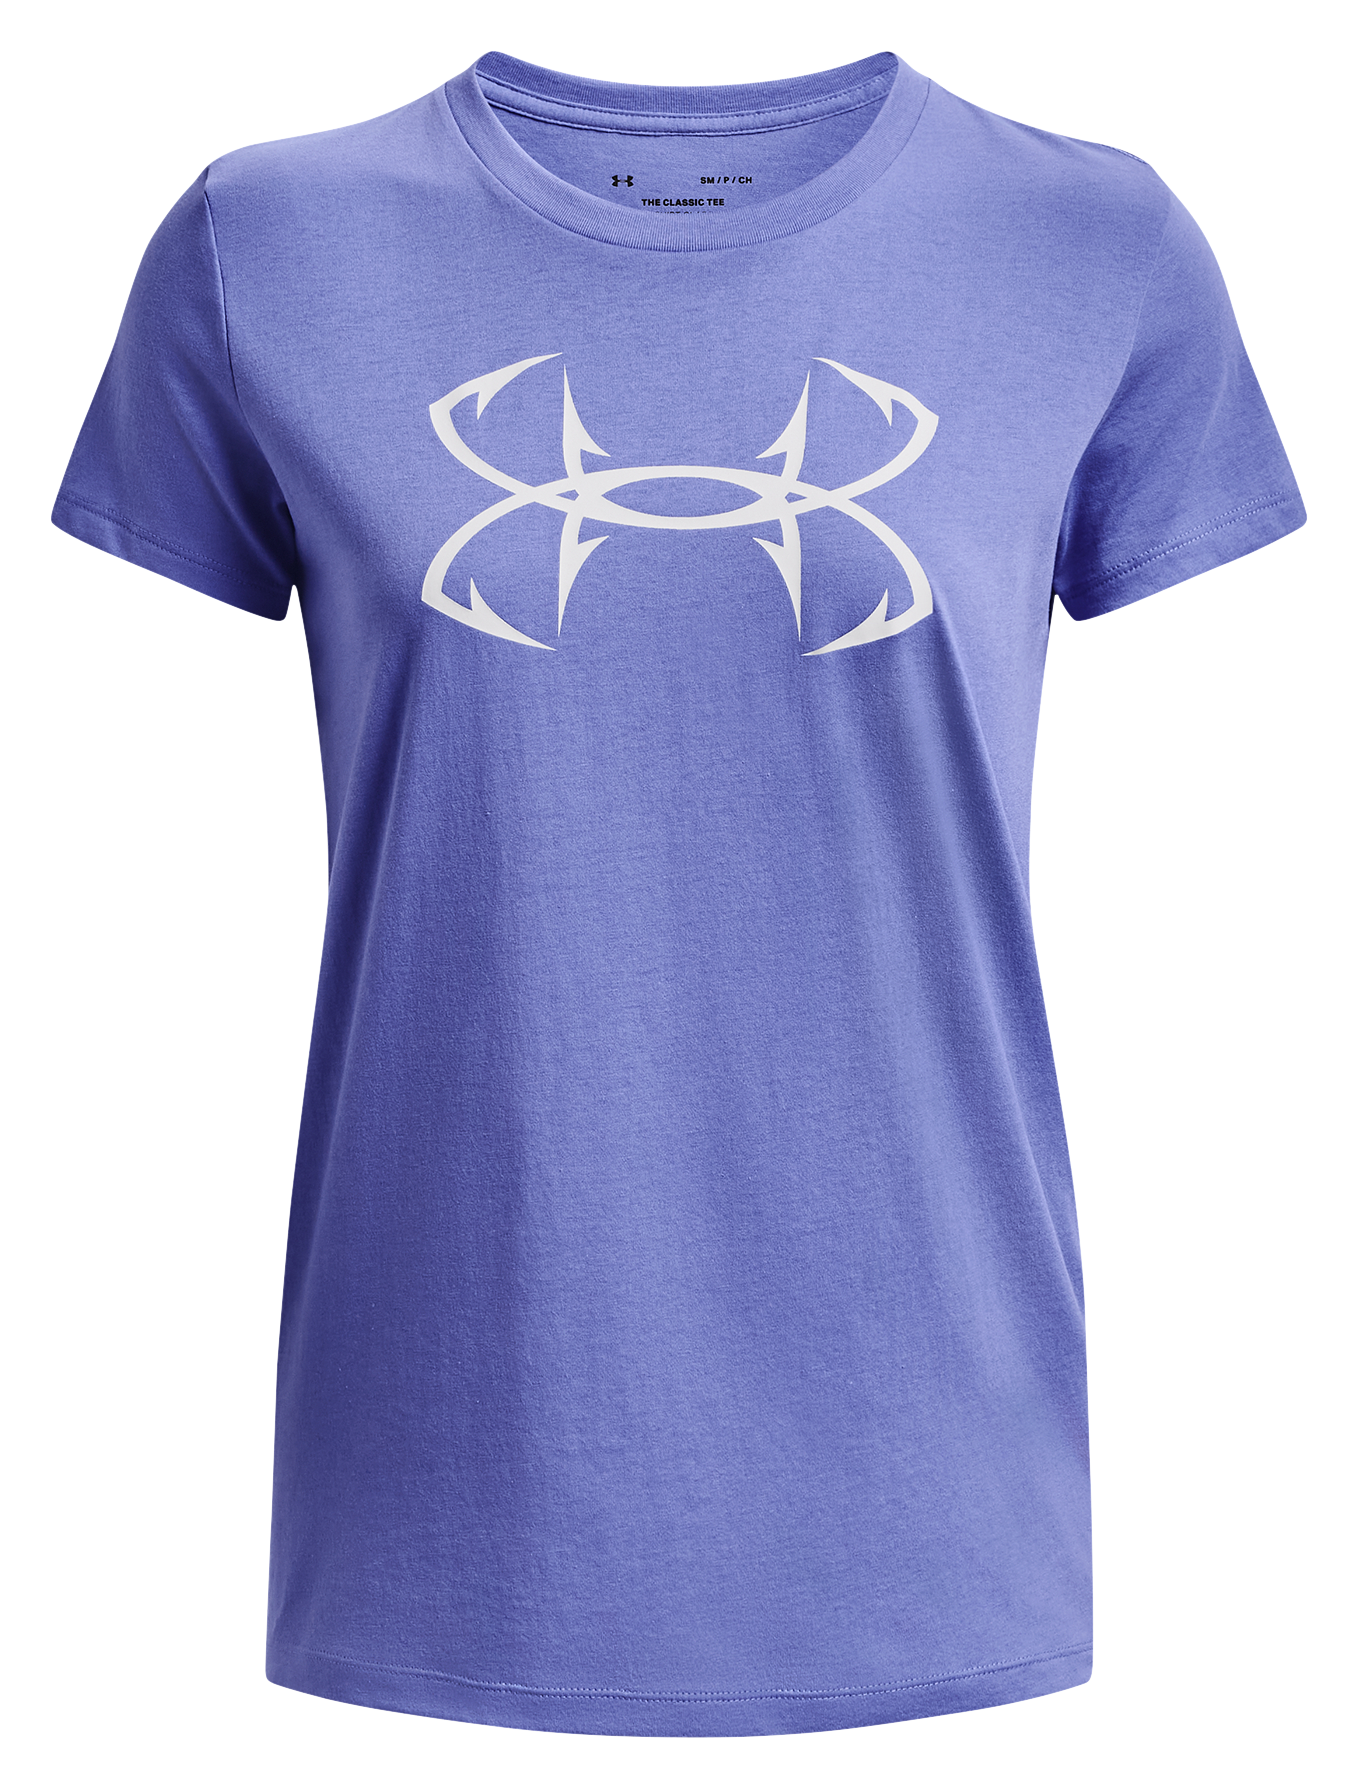 Under Armour Fish Hook Logo Short-Sleeve T-Shirt for Ladies